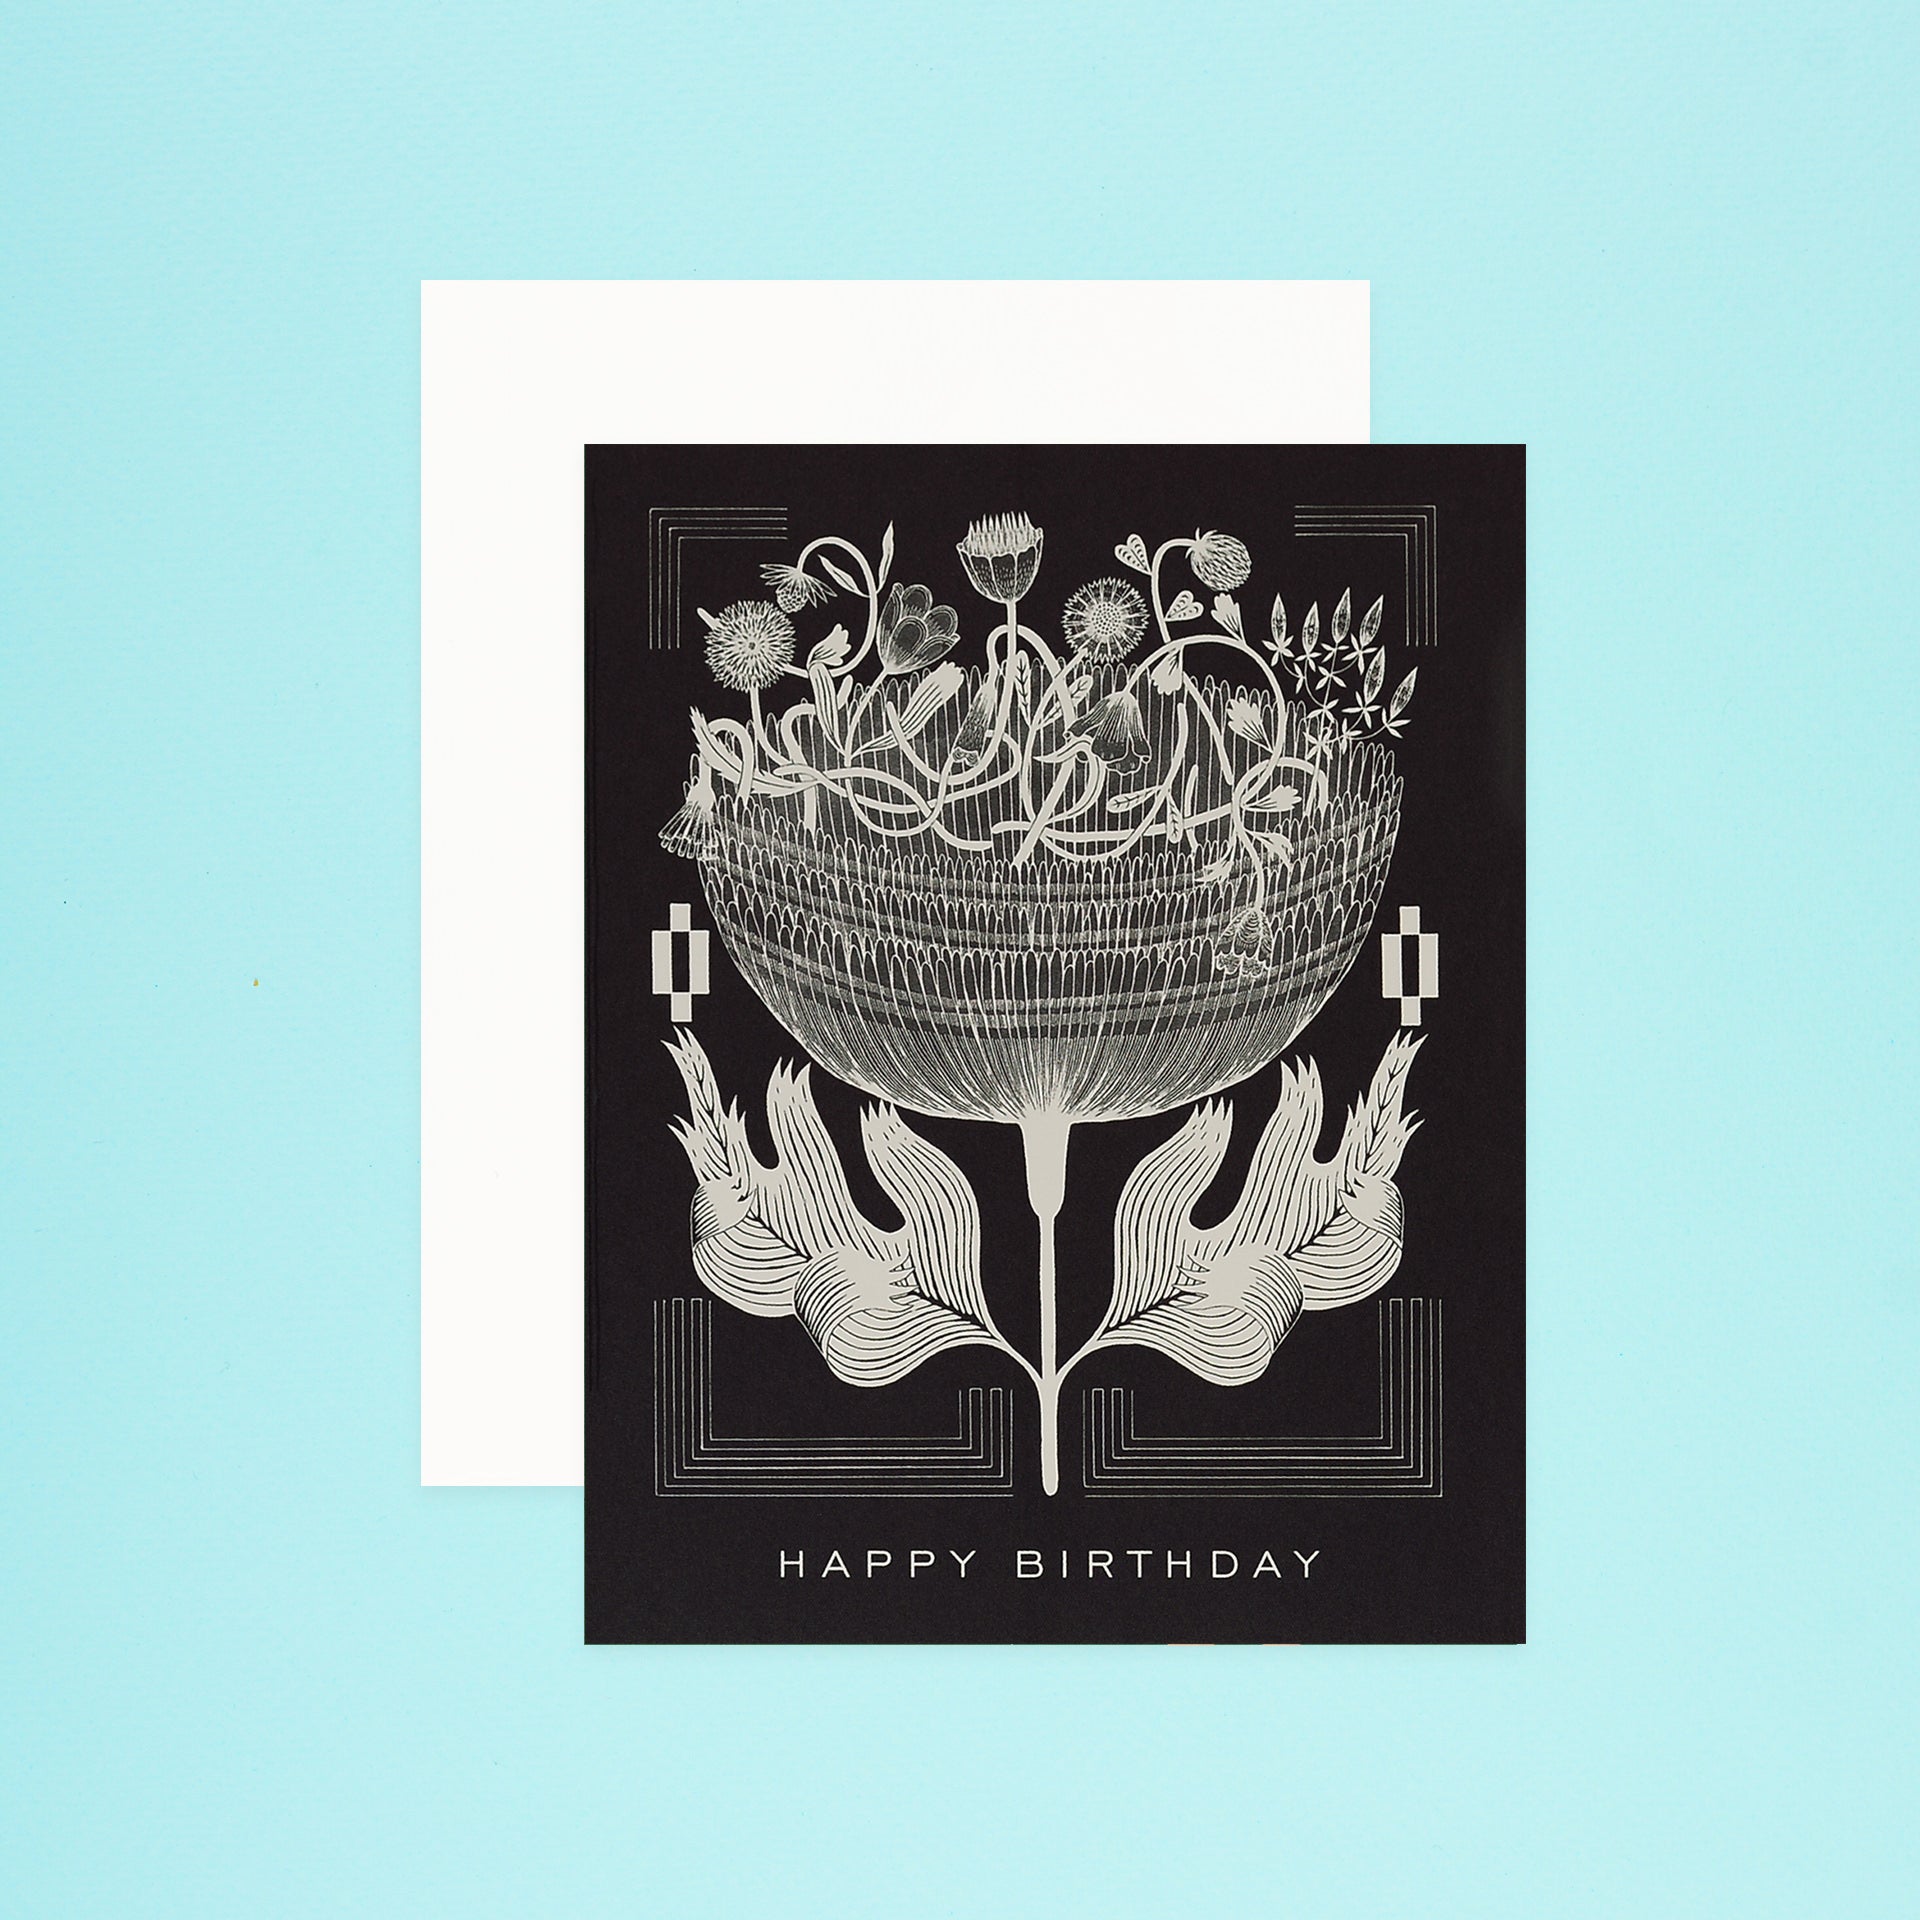 Red Cap Cards Black and White Birthday Card 